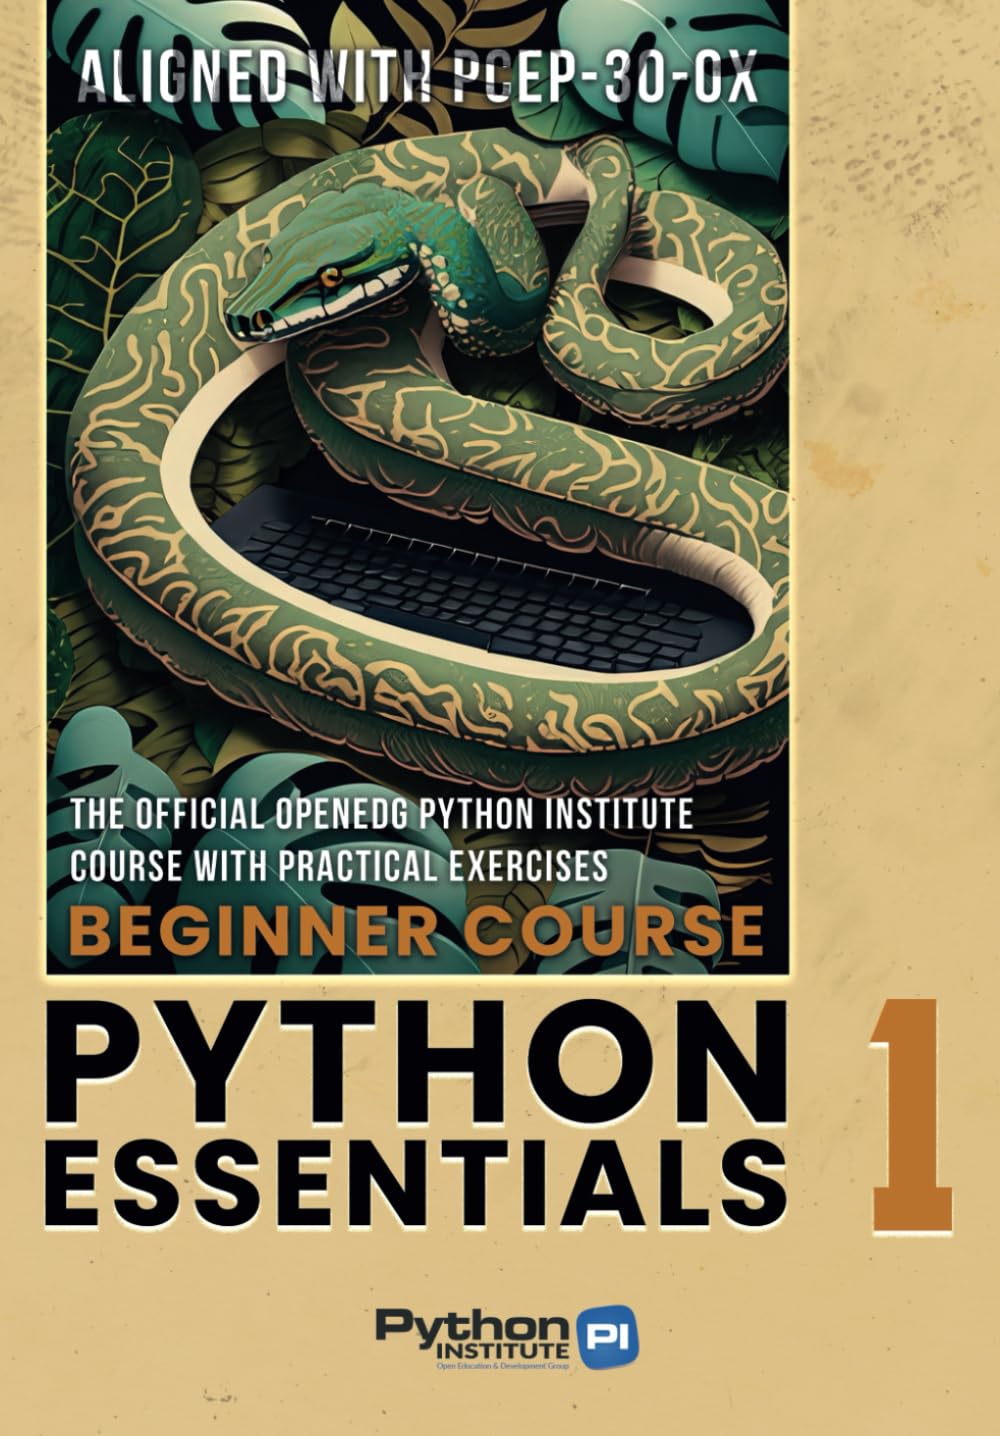 Python Essentials 1: The Official OpenEDG Python Institute Course Book – Aligned with PCEP-30-0x Certification Exam